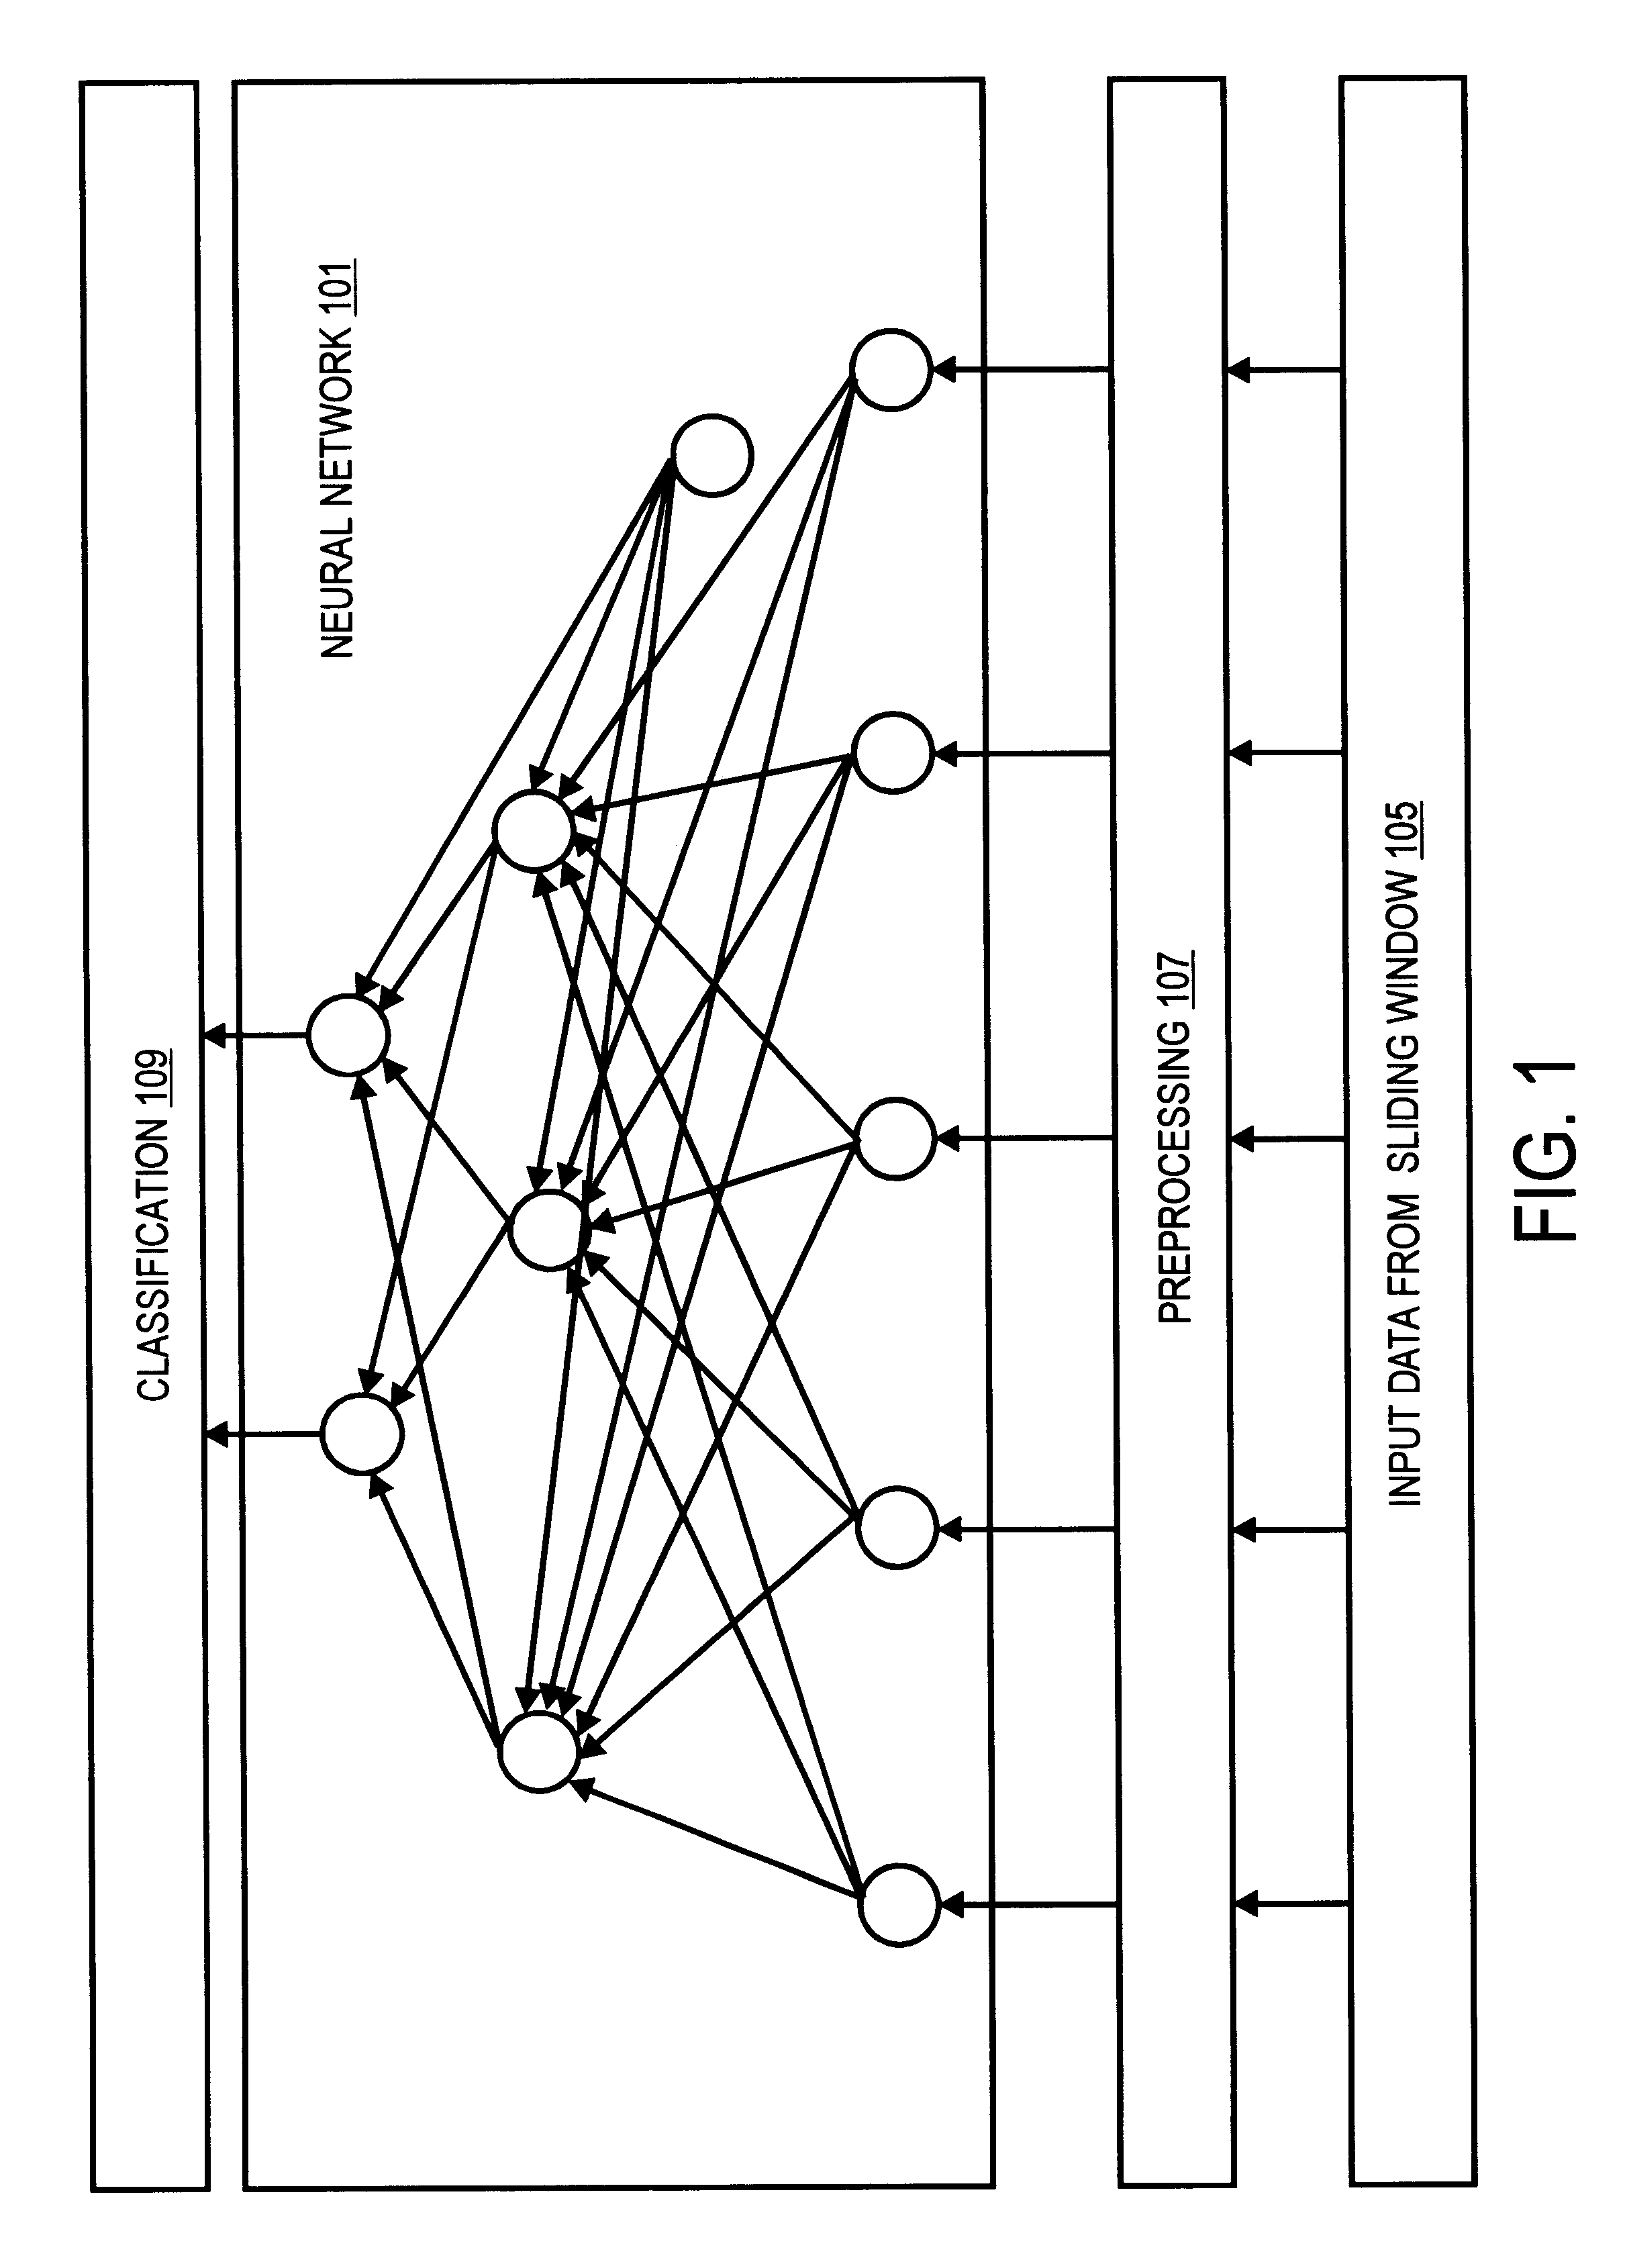 System and method for delineating spatially dependent objects, such as hydrocarbon accumulations from seismic data